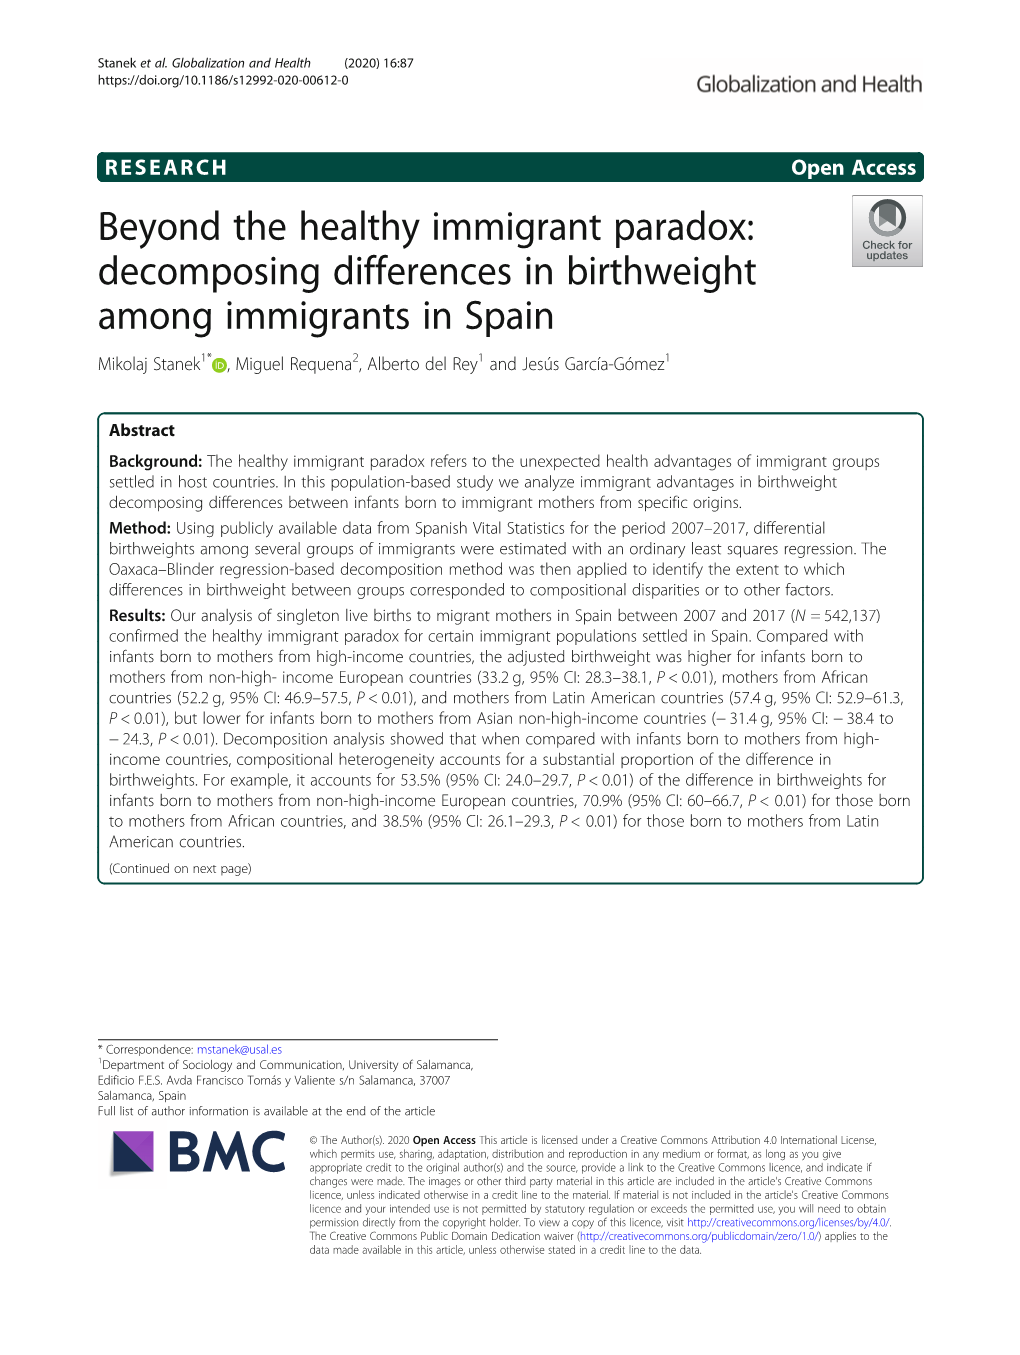 Beyond the Healthy Immigrant Paradox: Decomposing Differences